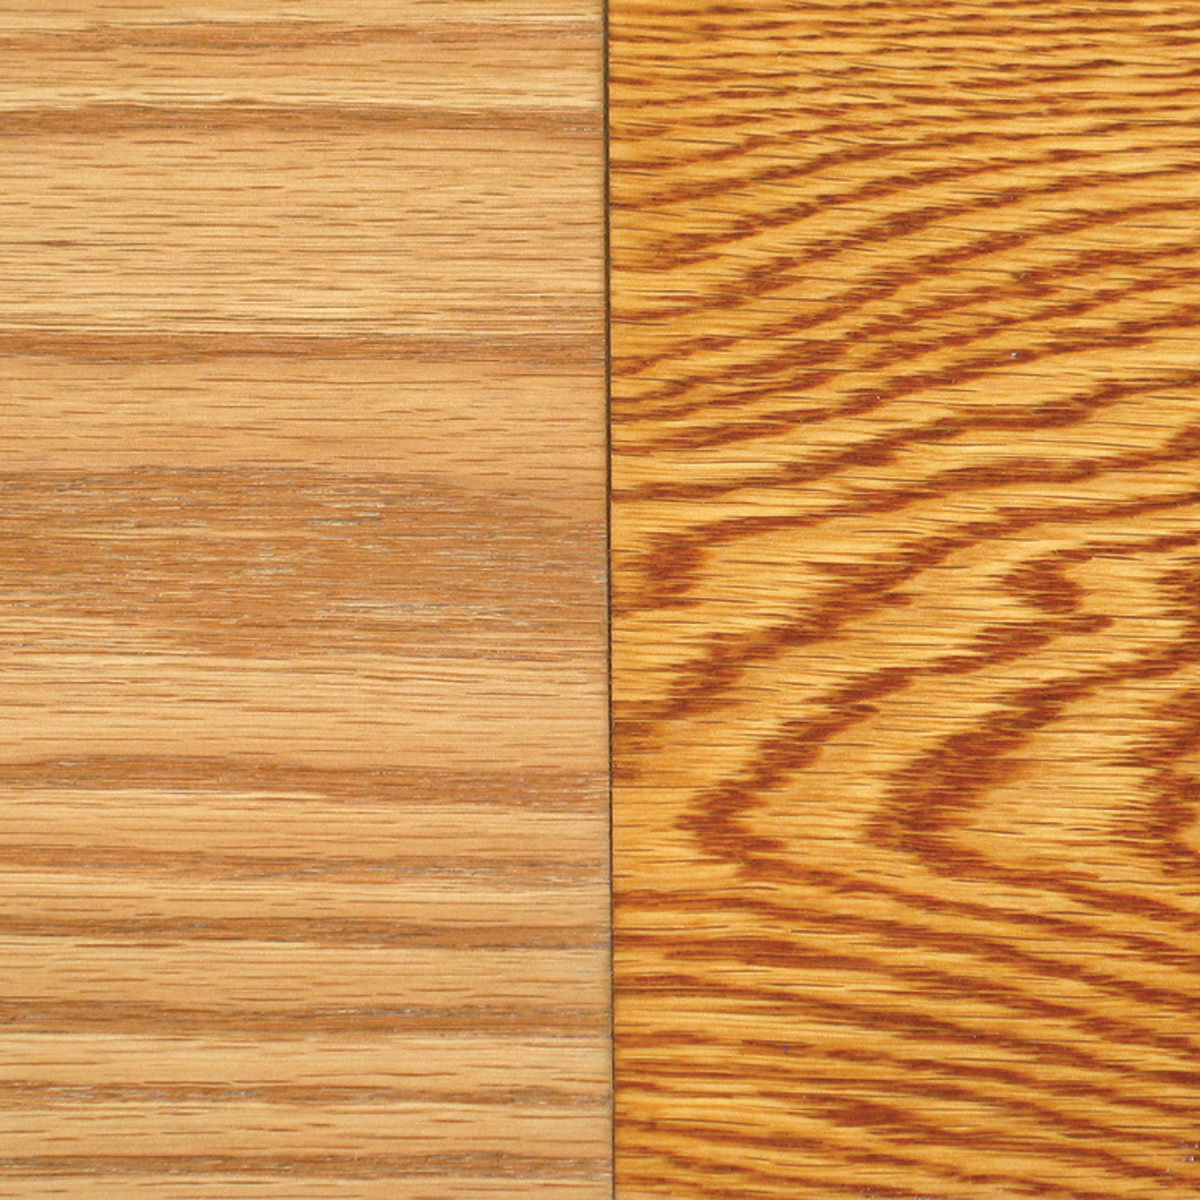 Polyurethane Over Boiled Linseed Oil: Ultimate Finish Guide